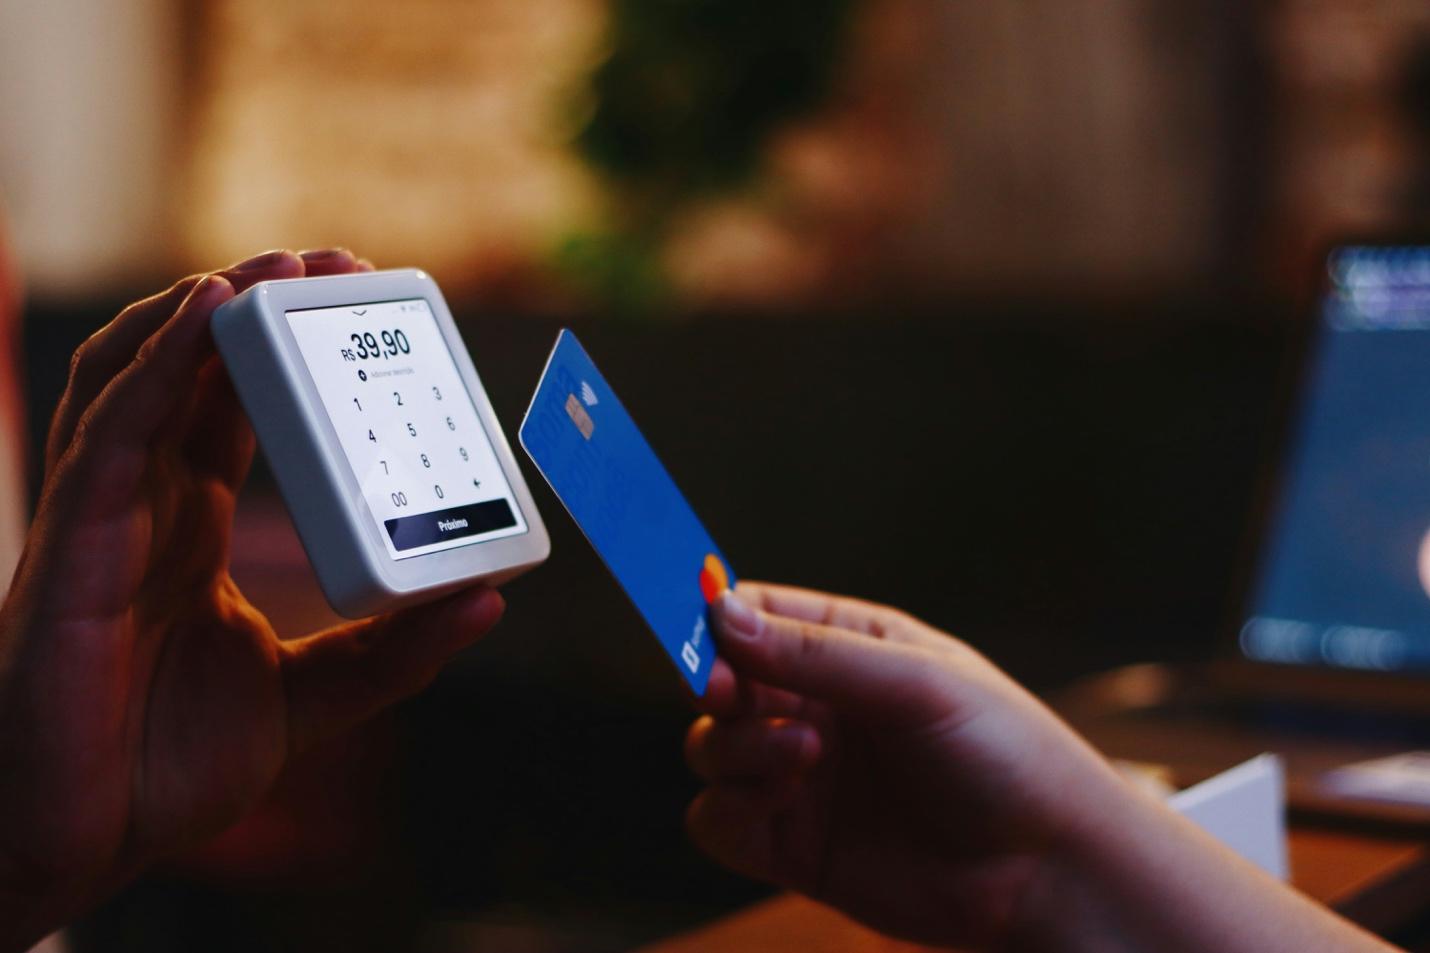 A person holding a credit card and a device

Description automatically generated